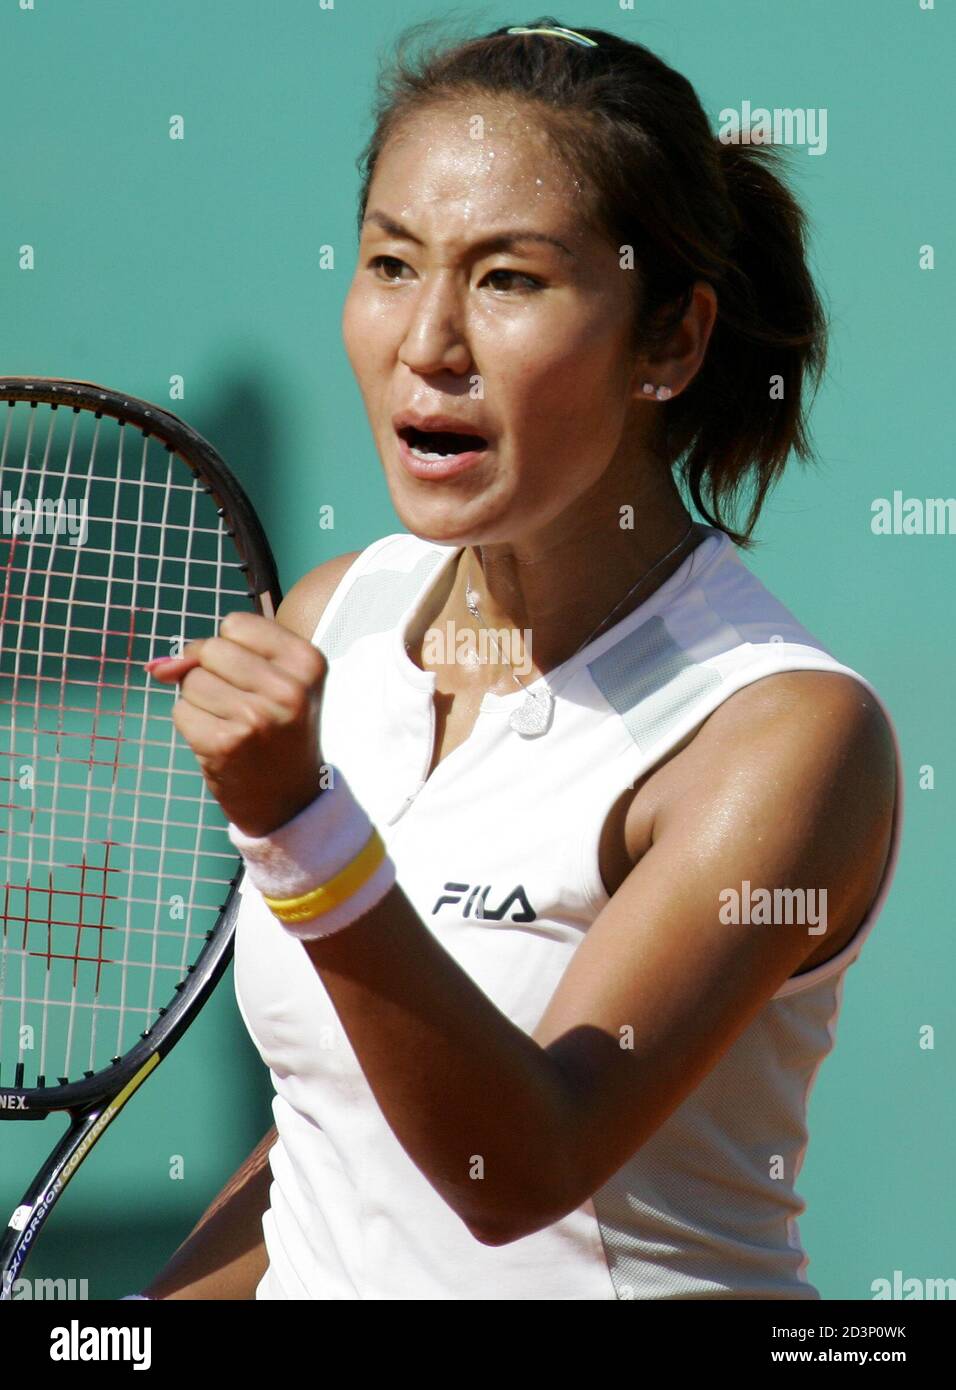 Japan's Morigami reacts after scoring a point during her match against Dementieva of Russia in the French tennis open at Roland Garros stadium.   Japan's Akiko Morigami reacts after scoring a point during her match against fourth seed Elena Dementieva of Russia in the French tennis open at Roland Garros stadium, May 27, 2005. REUTERS/Charles Platiau Stock Photo